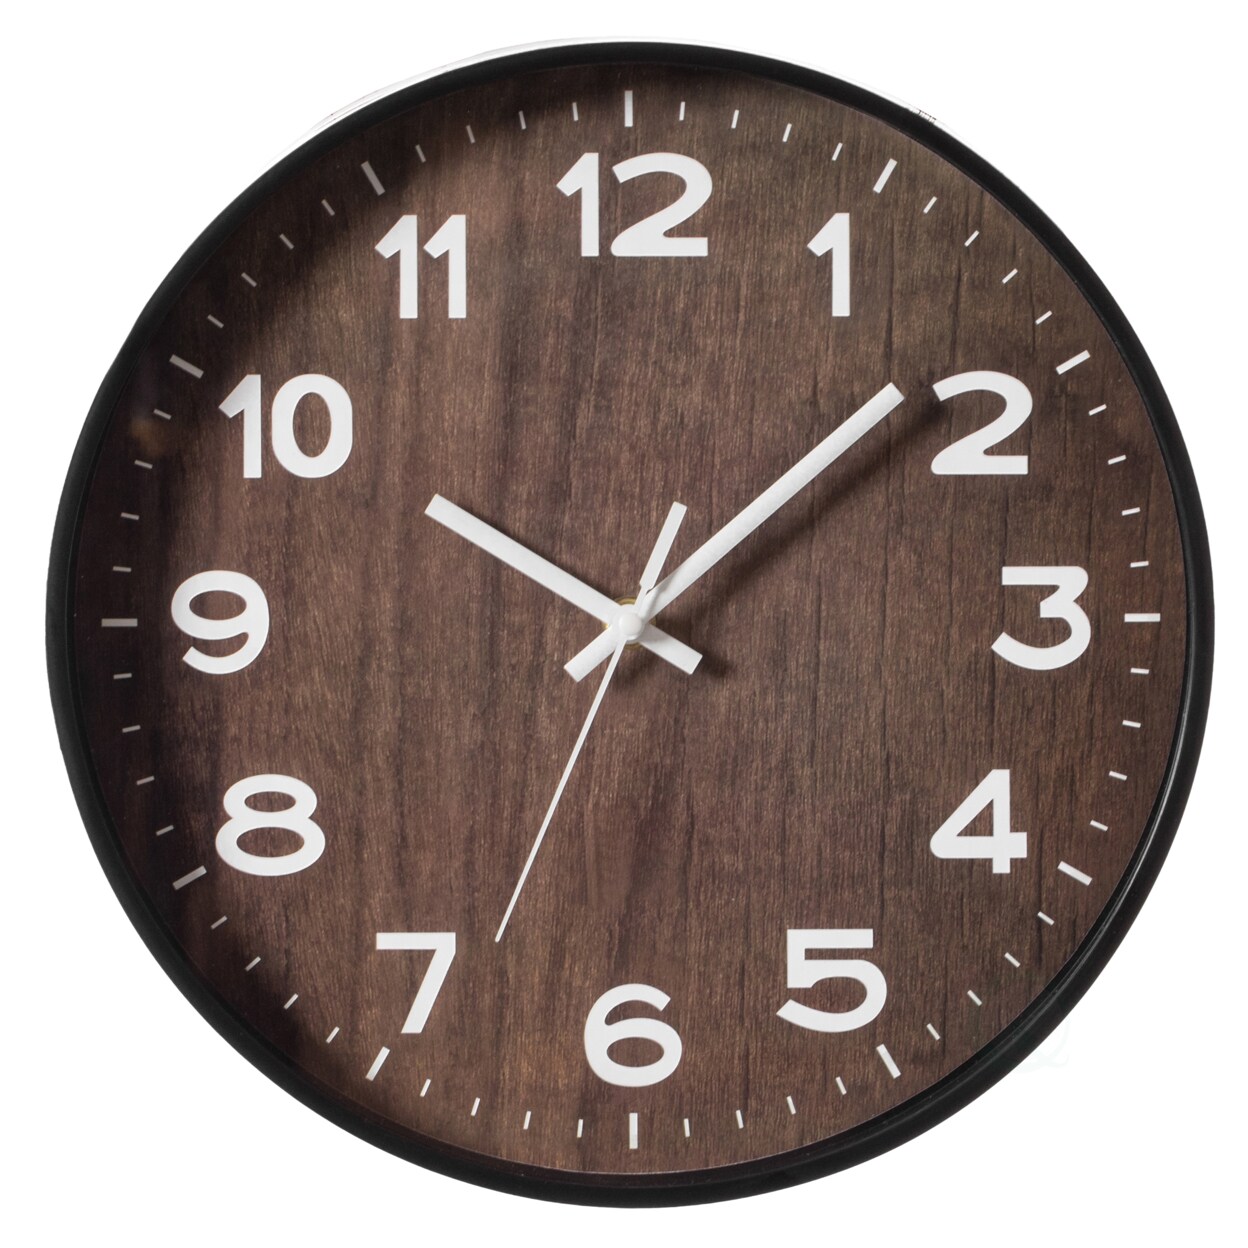 Quickway Imports Decorative Modern Round Wood- Looking Plastic Wall Clock for Living Room Kitchen or Dining Room